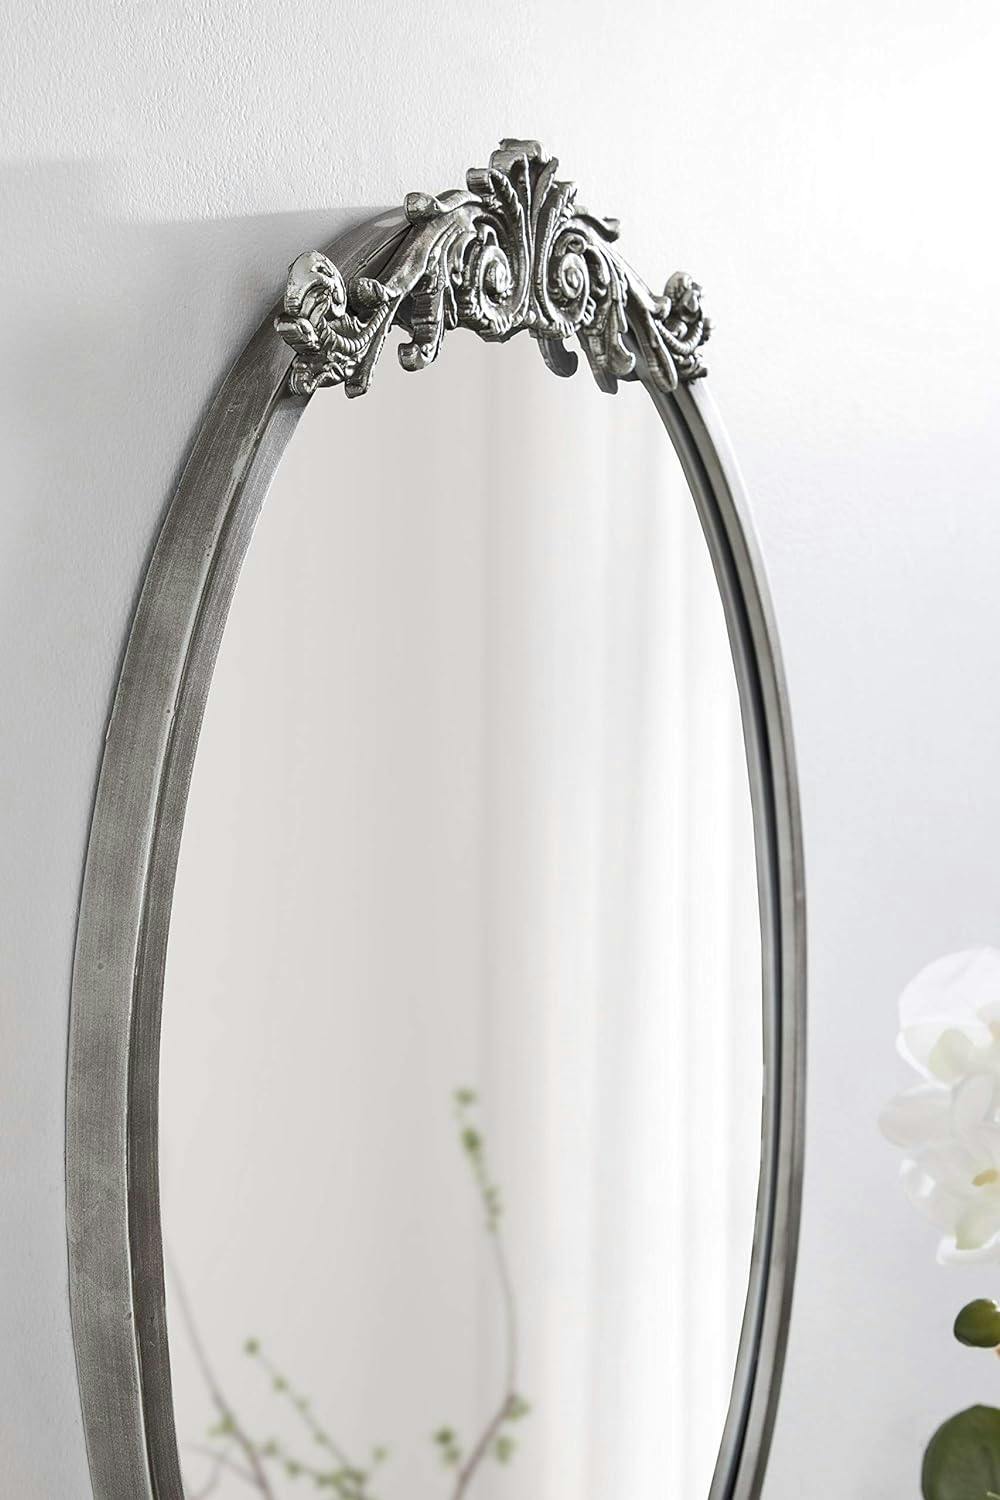 Arendahl Baroque-Inspired Ornate Silver Oval Wall Mirror